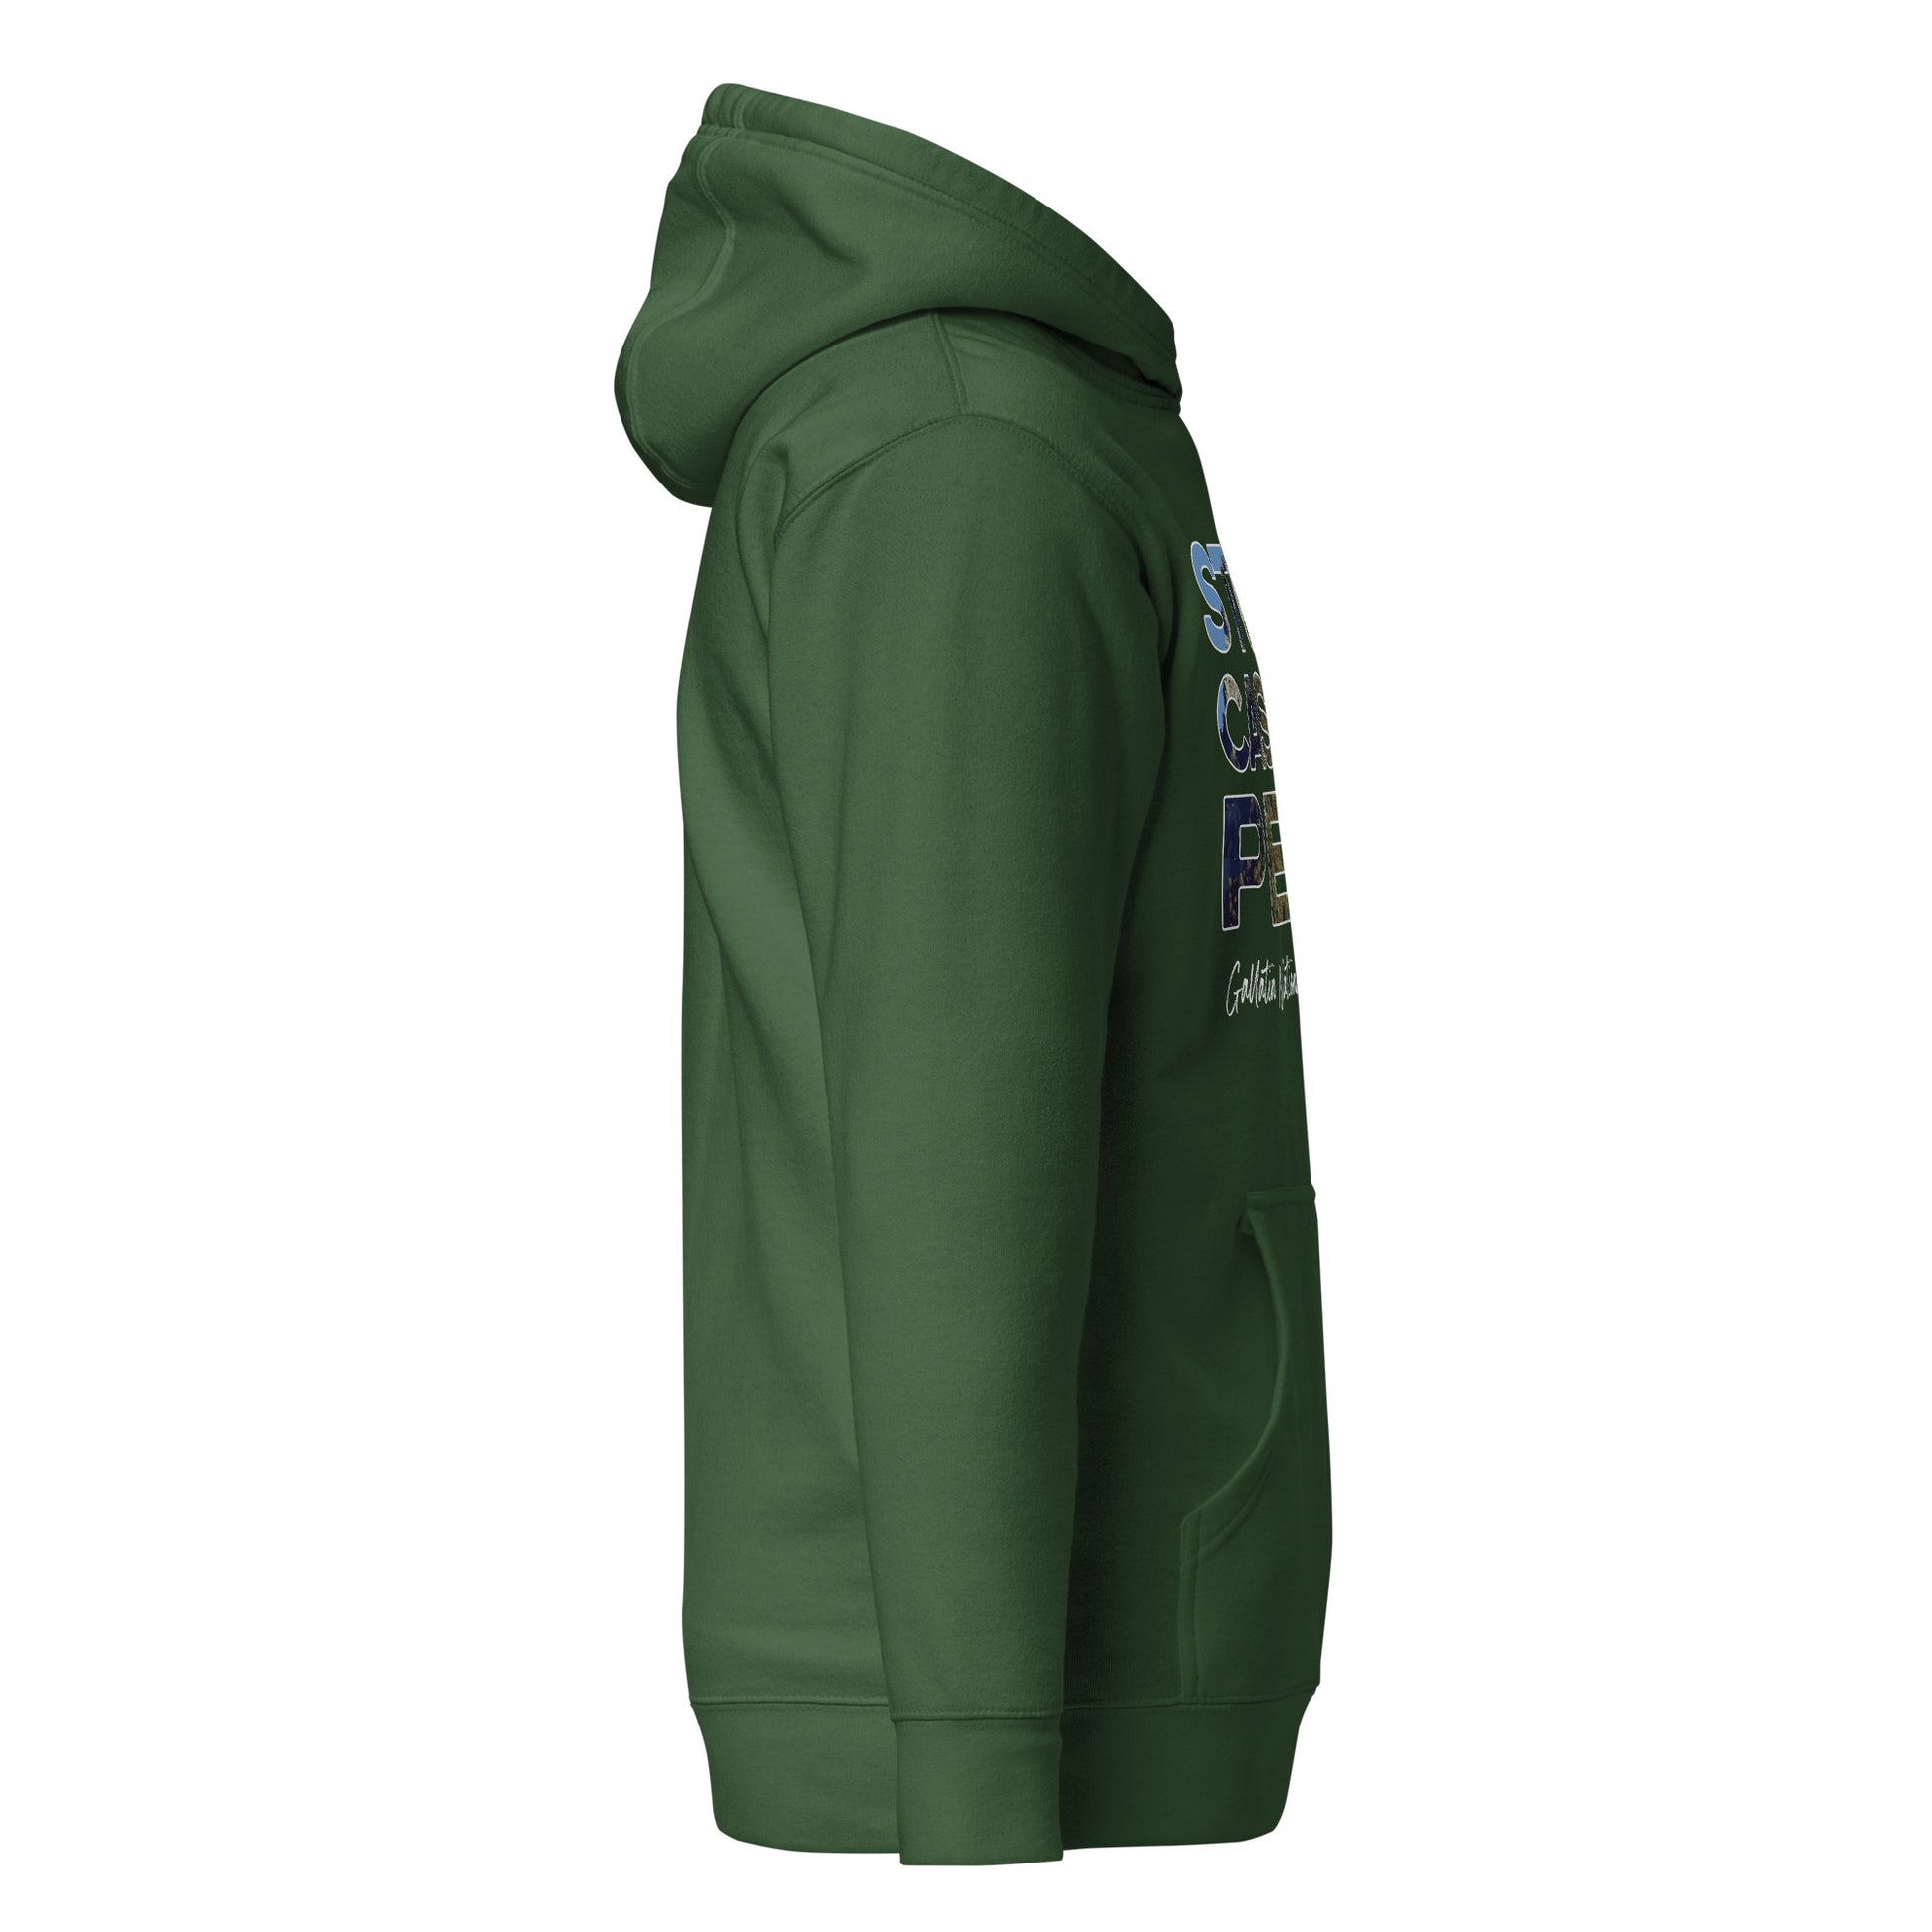 Right Side view of Storm Castle Peak in Custer Gallatin National Forest Montana Forest Green Cotton Hoodie from Park Attire